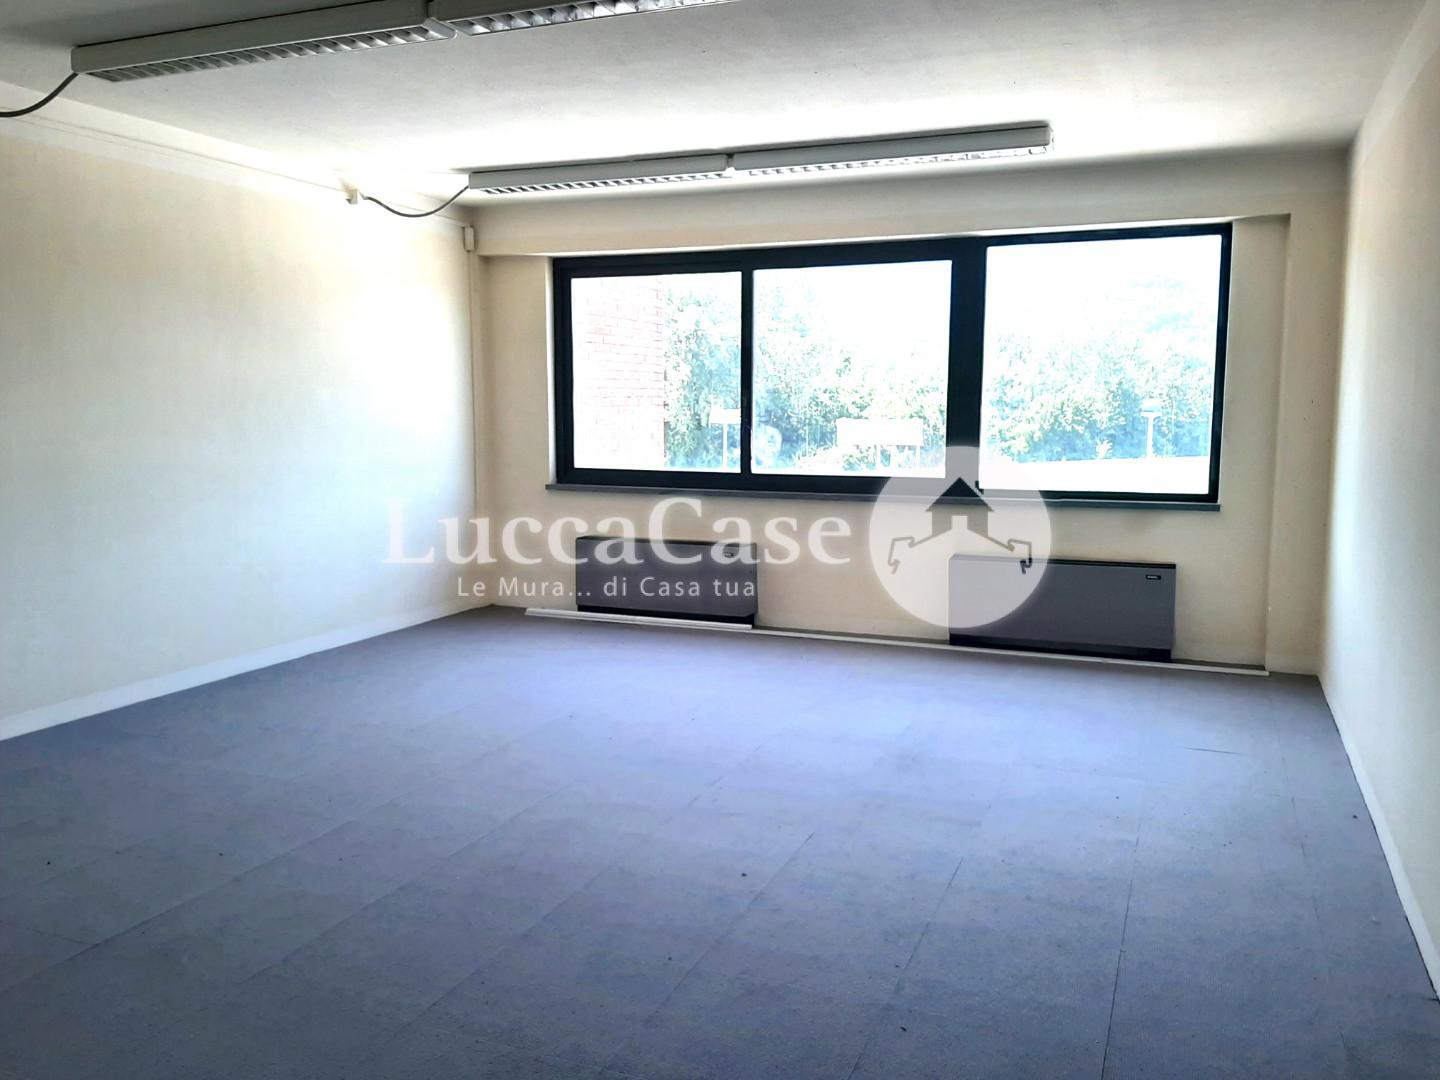 Office for commercial rentals, ref. F063K